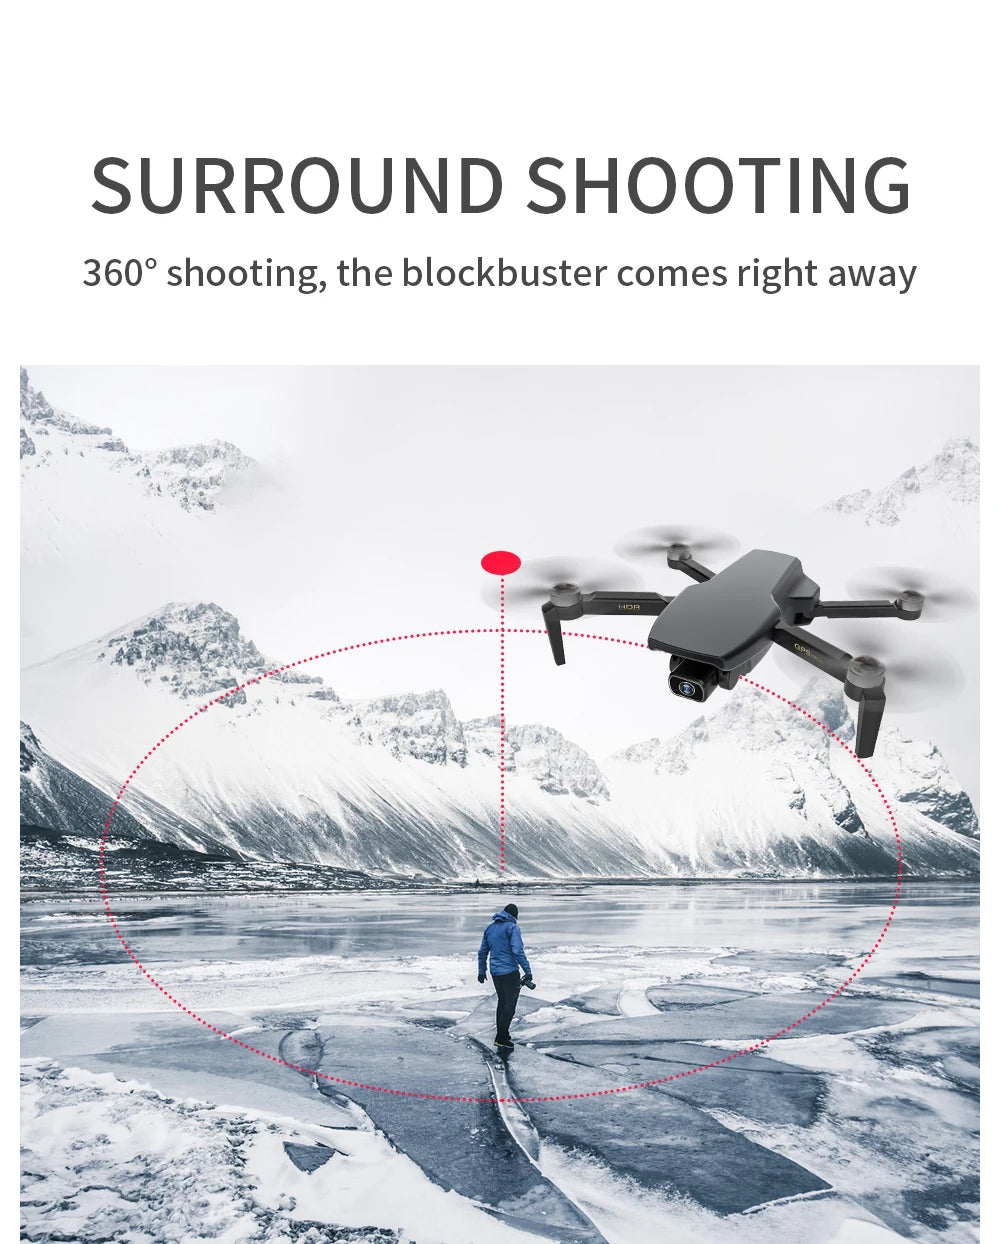 ZLRC SG108 Drone, SURROUND SHOOTING 3609 shooting; the blockbuster comes right away 1